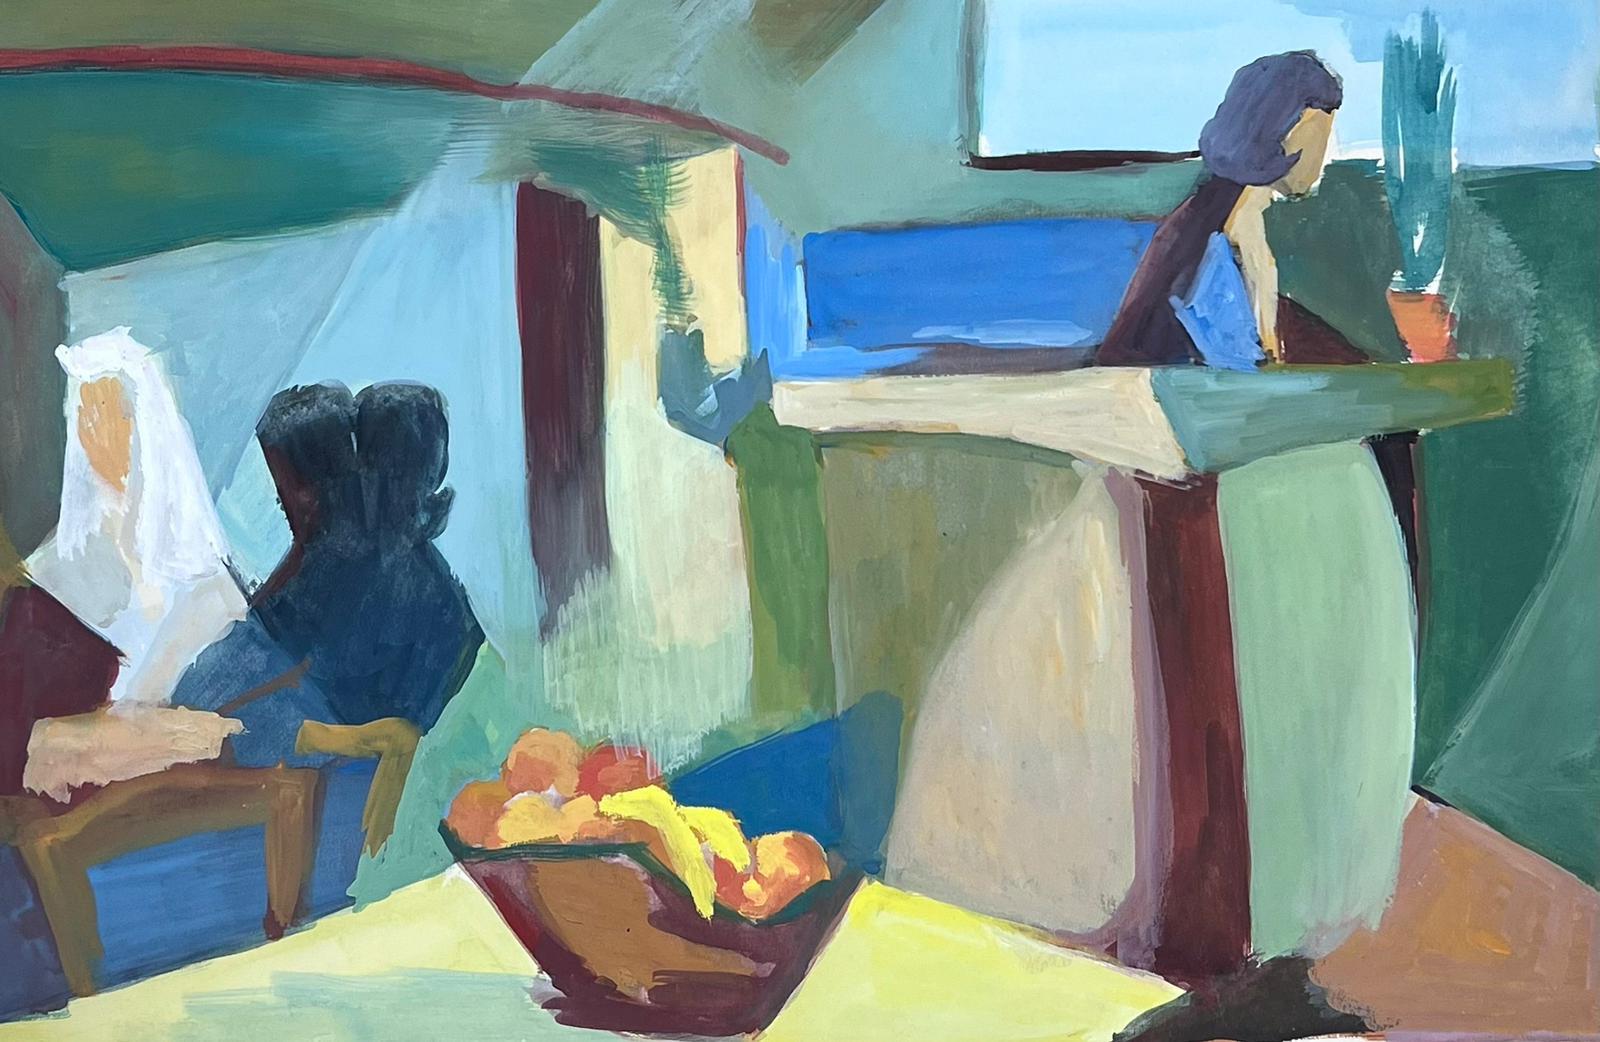 Guy Nicod Figurative Painting - 20th Century French Cubist Modernist Interior Cafe Scene with Figures